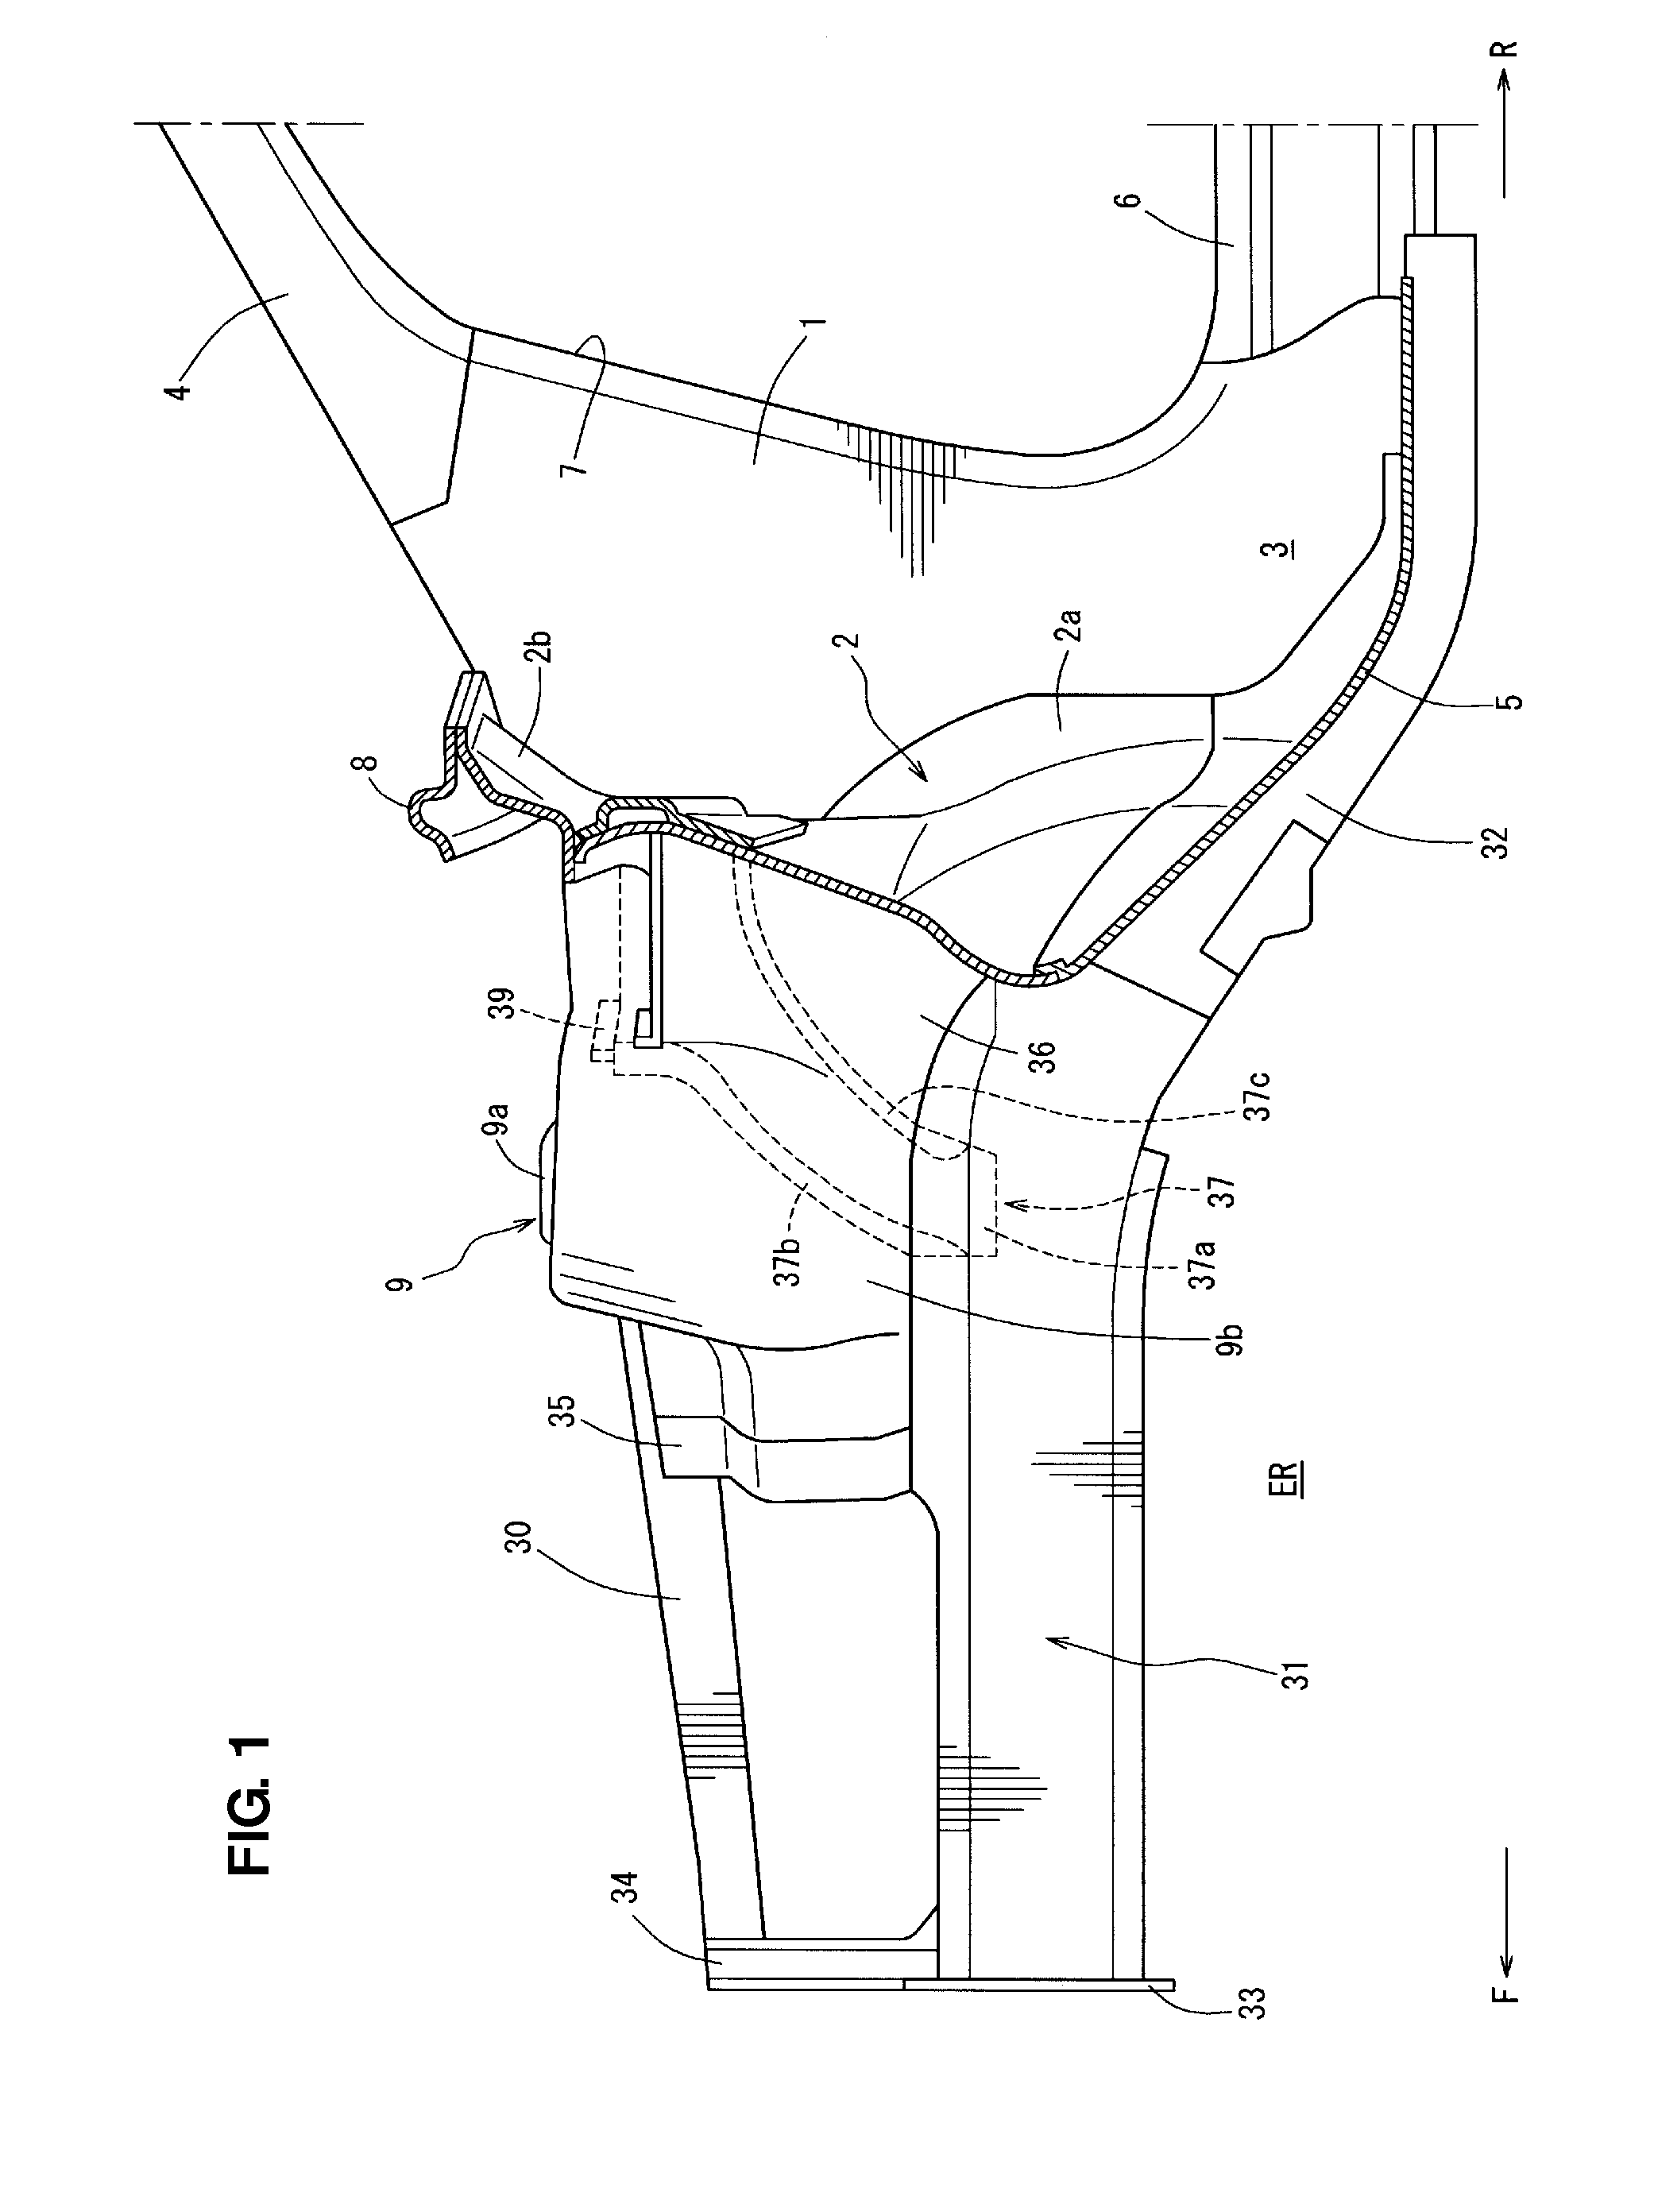 Vehicle-body front structure